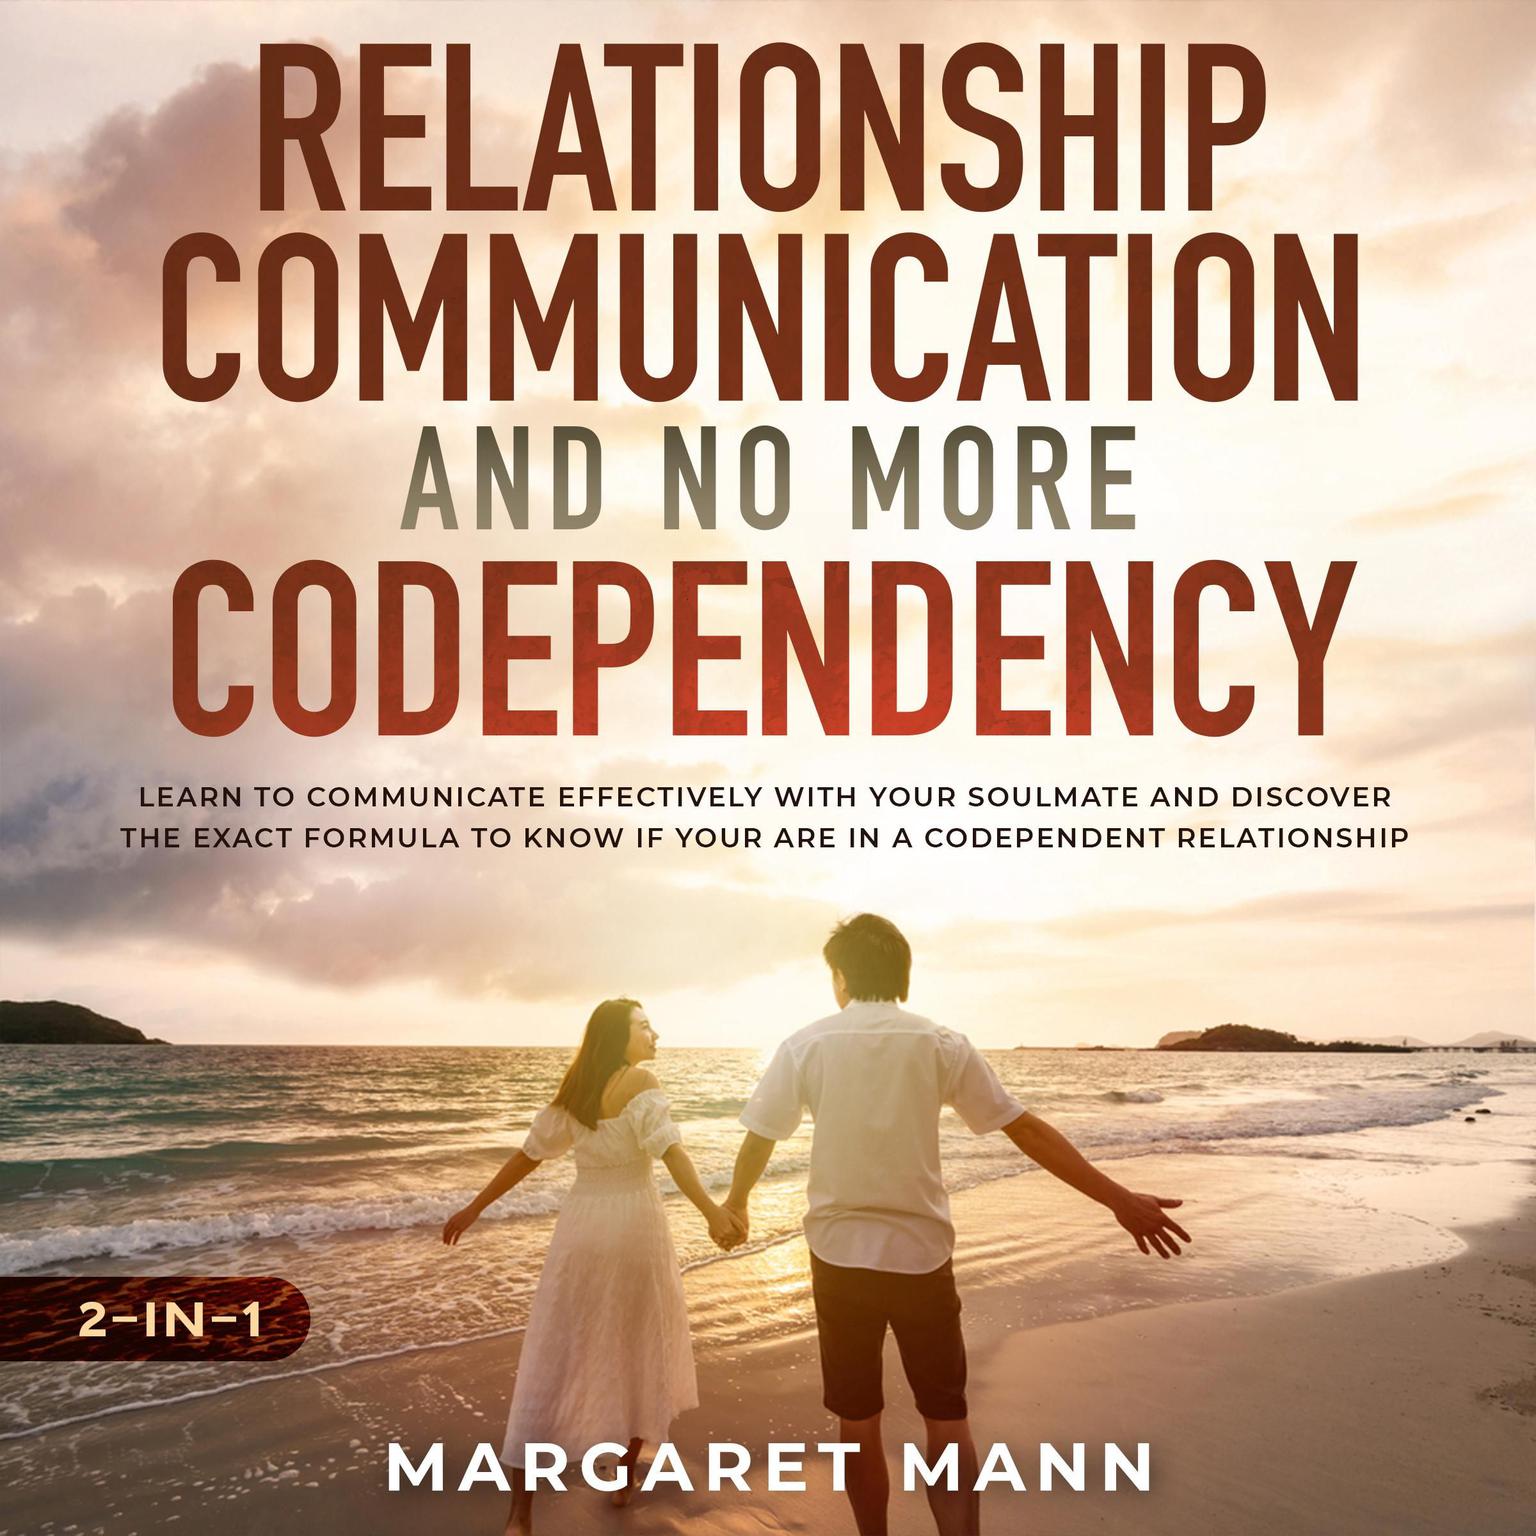 Relationship Communication and No More Codependency 2-in-1: Learn to Communicate Effectively With Your Soulmate and Discover the Exact Formula to Know if You Are in a Codependent Relationship Audiobook, by Margaret Mann